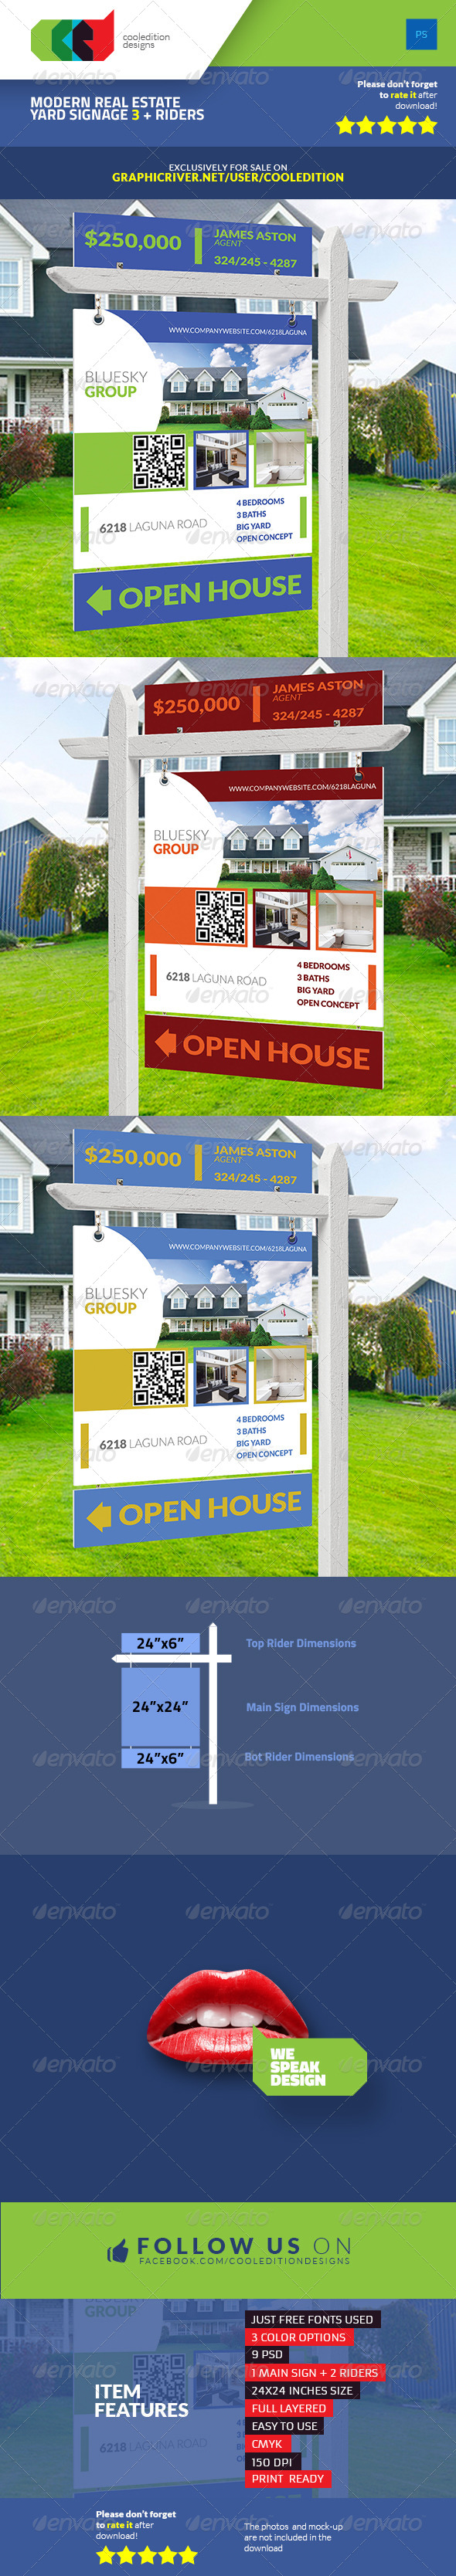 Download Modern Real Estate Yard Signage 3 + Riders by cooledition ...